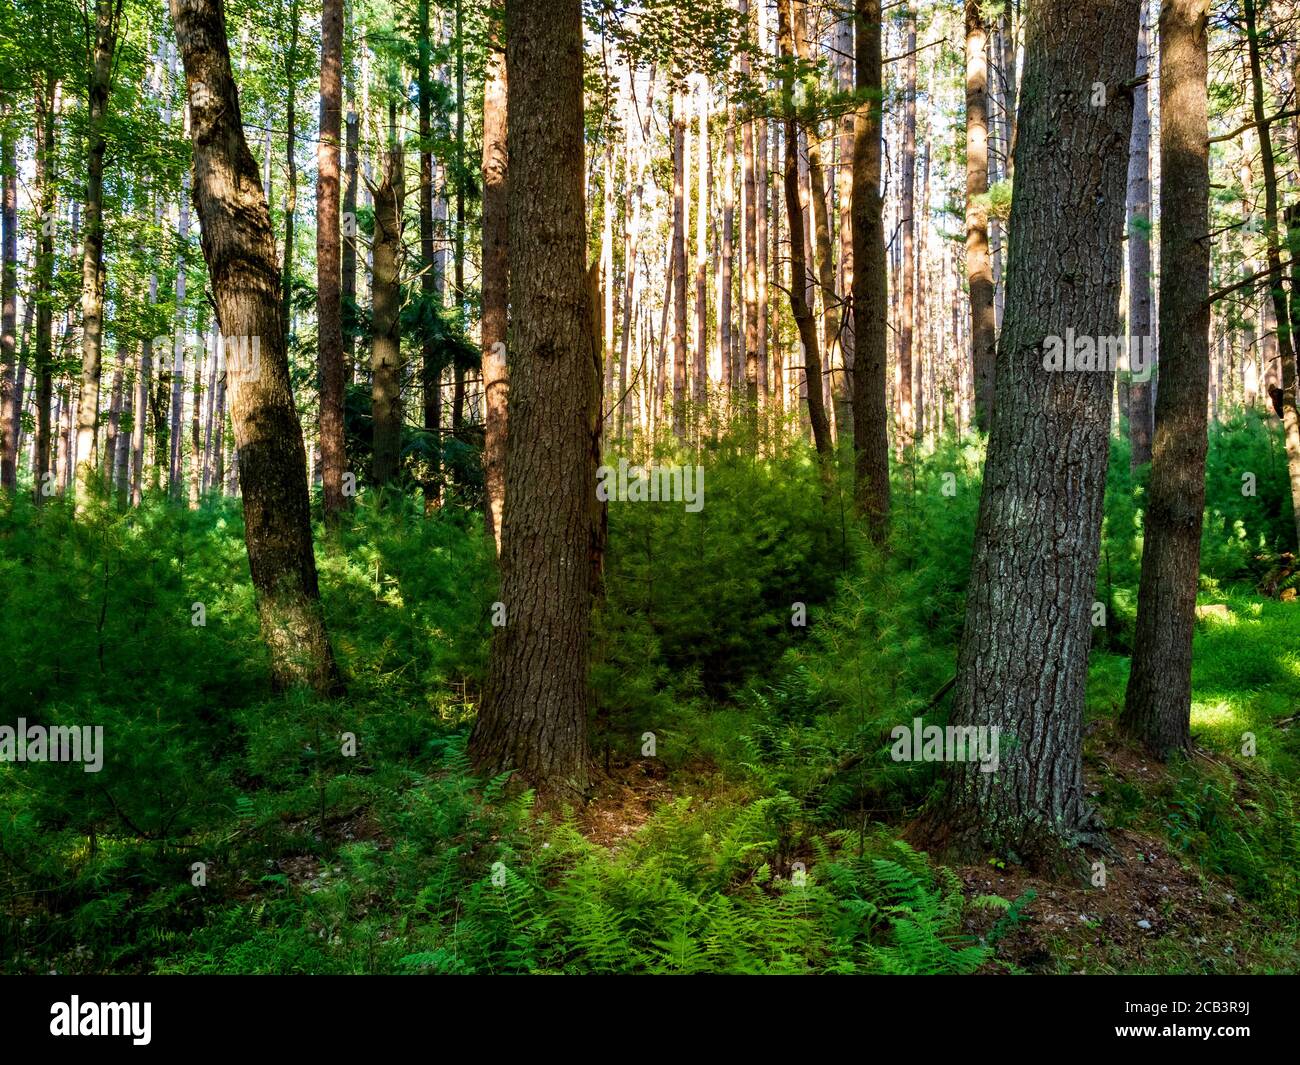 Deep in the forest at Cooks Forest State Park in the Allegheny National Forest of Pennsylvania.  Tall trees packed together tightly with baby pine tre Stock Photo